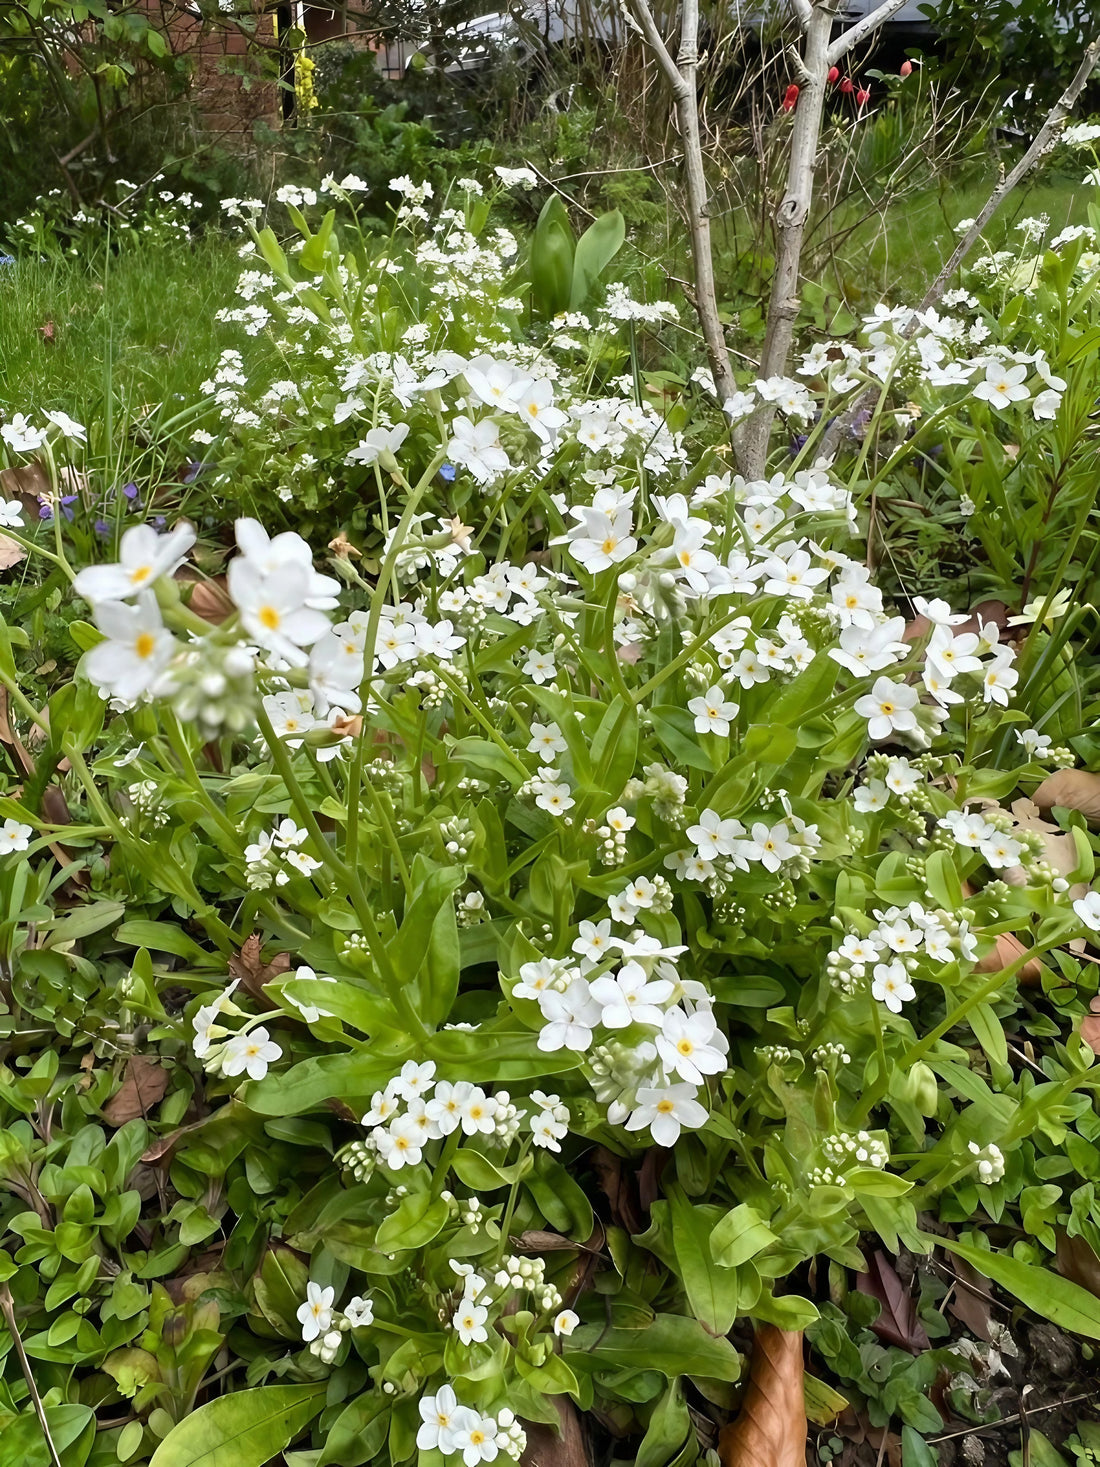 Cluster of white Forget-me-not flowers with yellow centers in a natural woodland setting